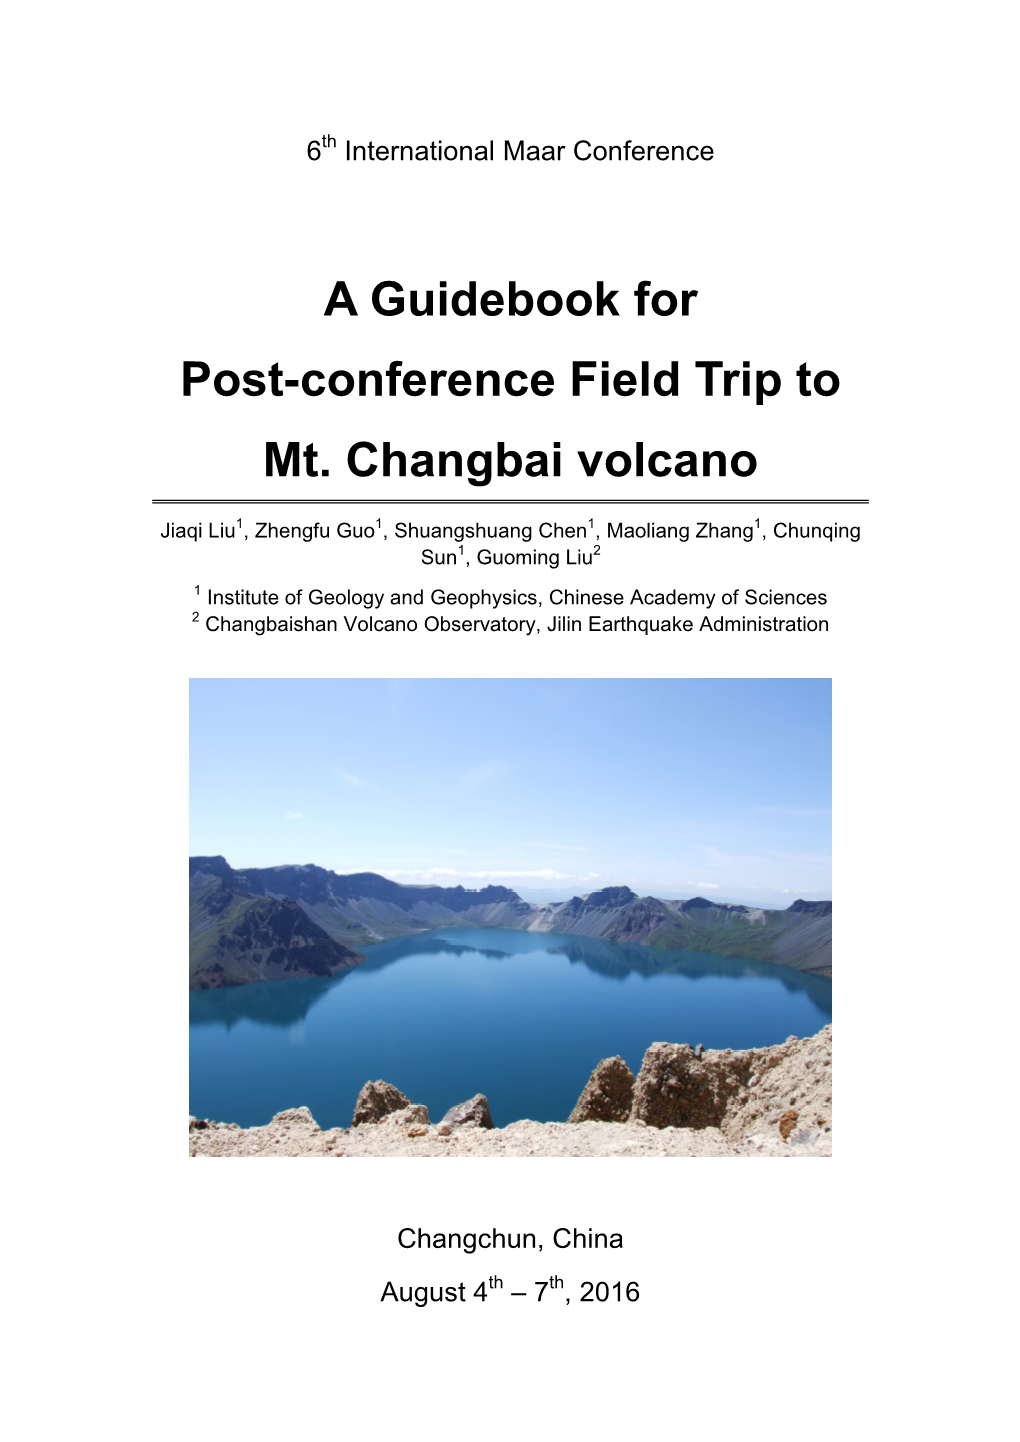 A Guidebook for Post-Conference Field Trip to Mt. Changbai Volcano